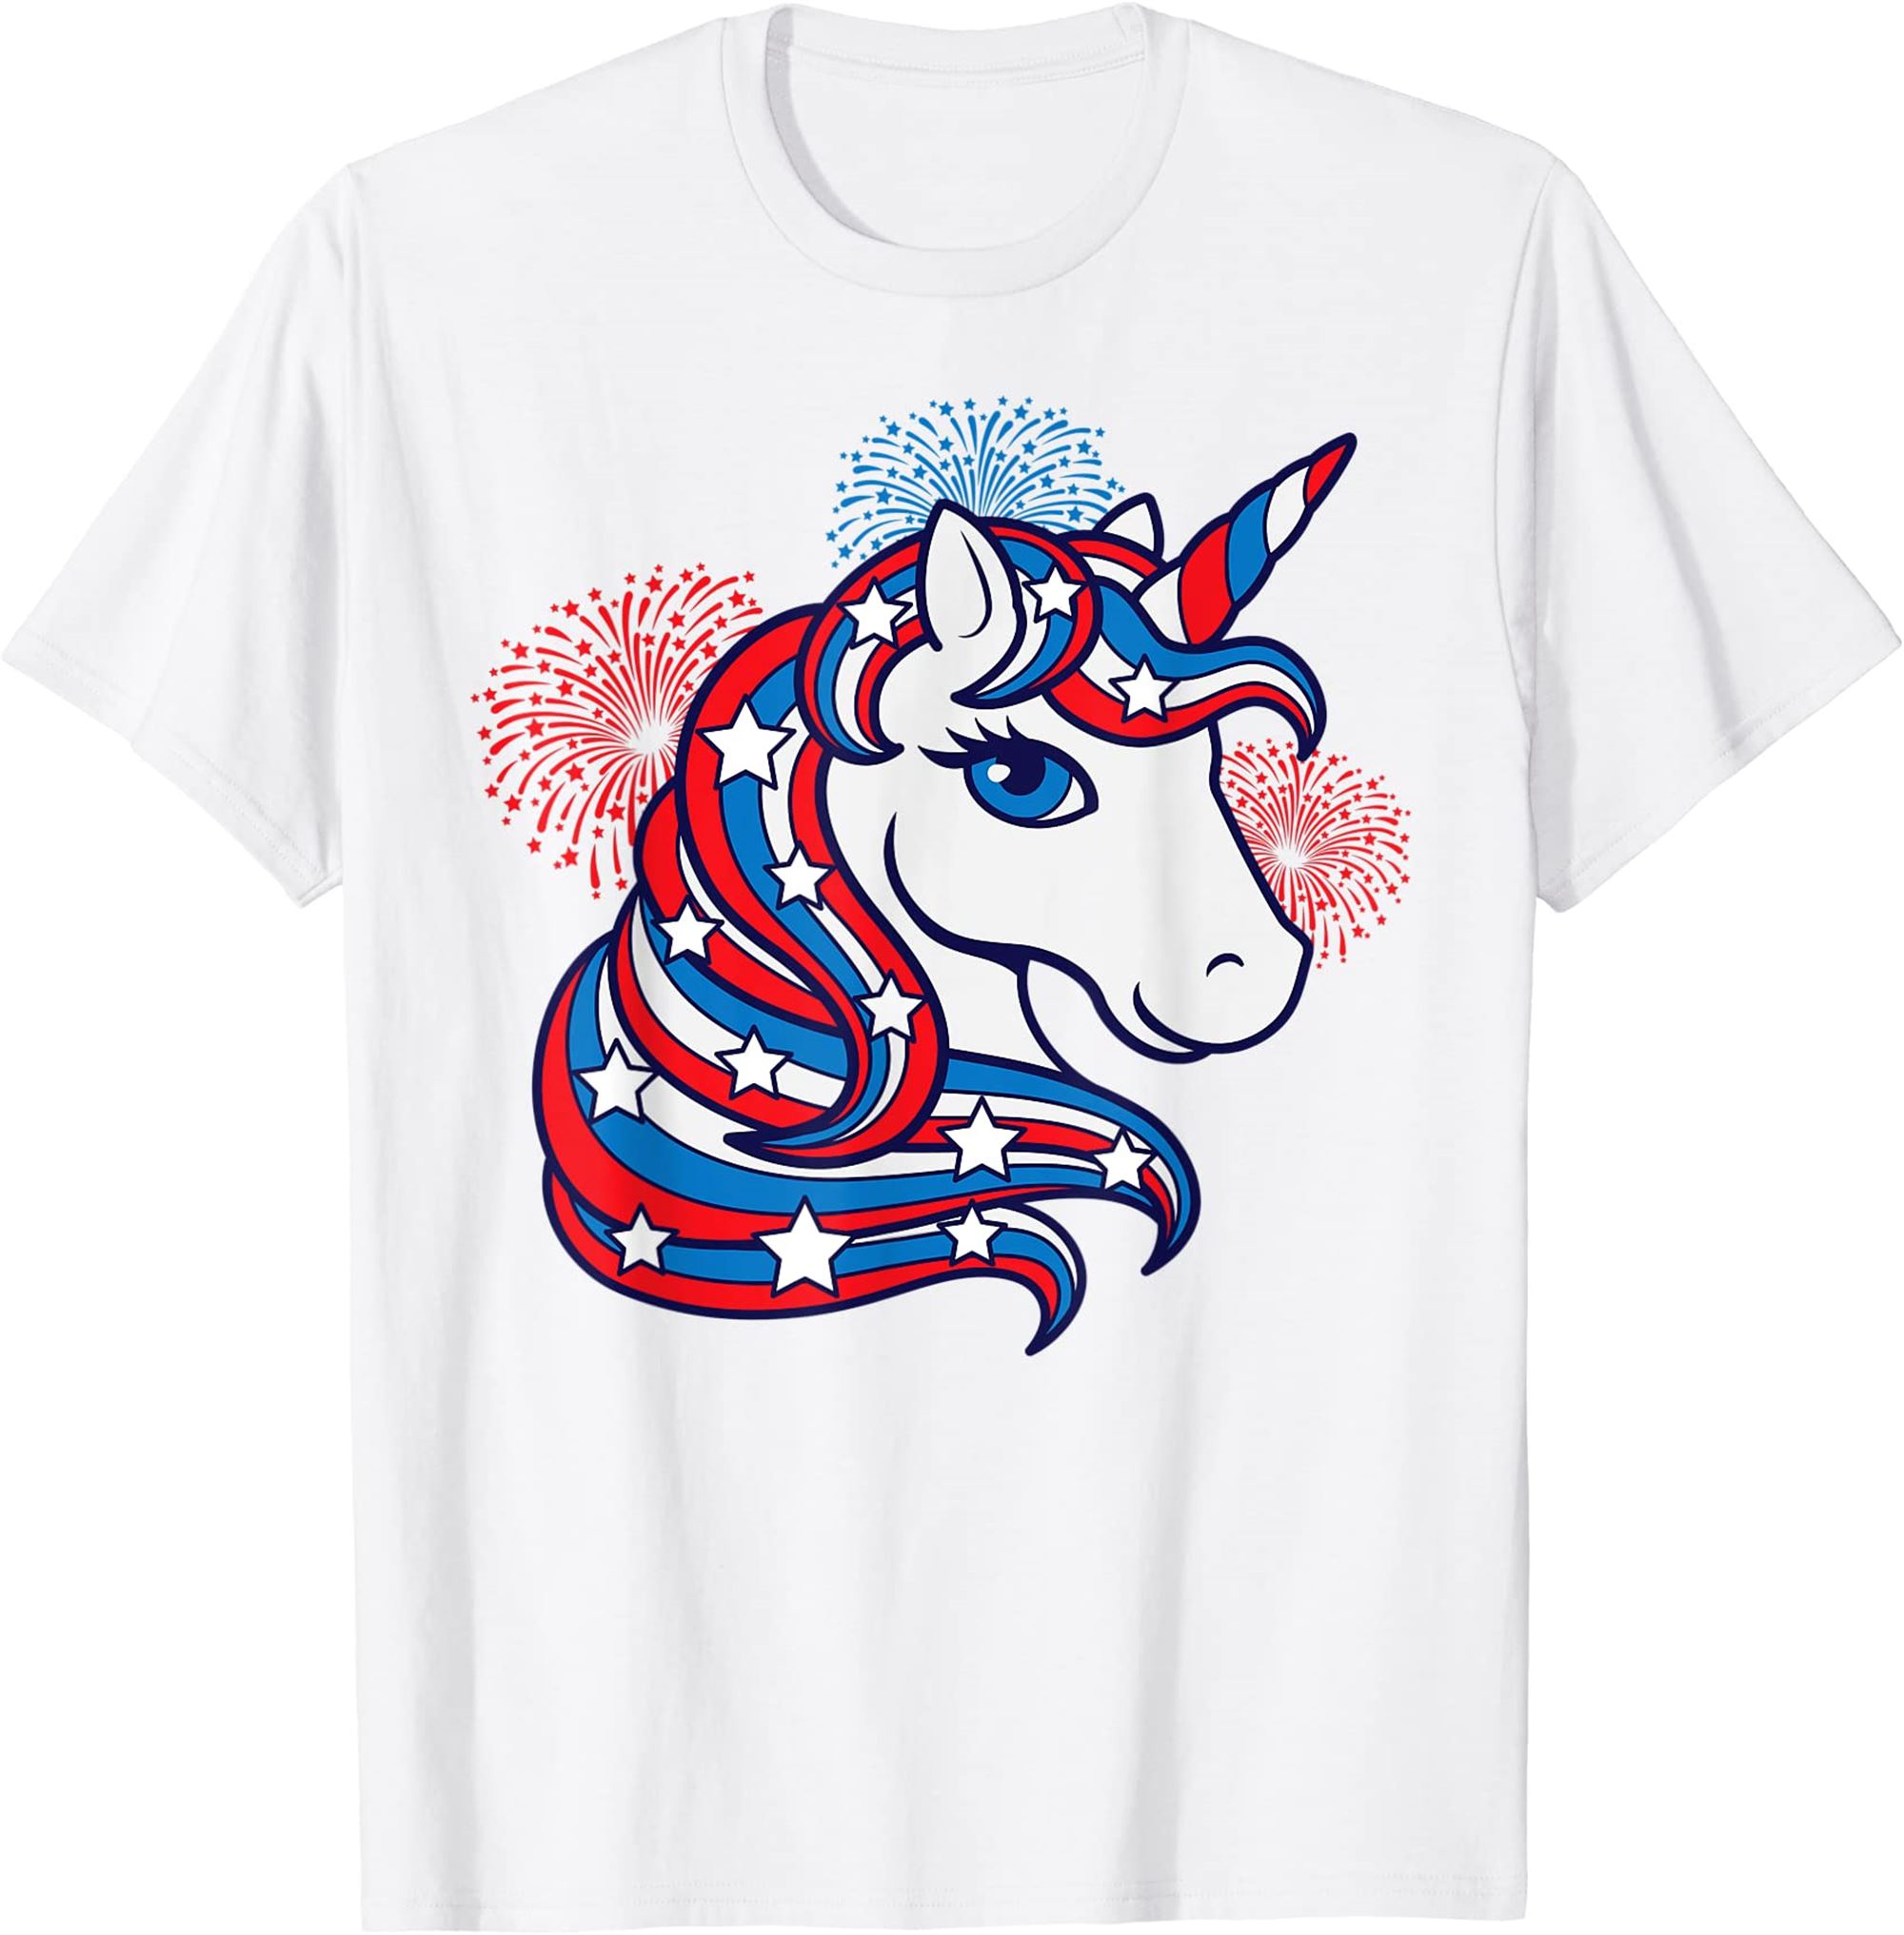 Patriotic Unicorn 4th Of July Shirt For Girls American Flag T-shirt Full Size Up To 5xl